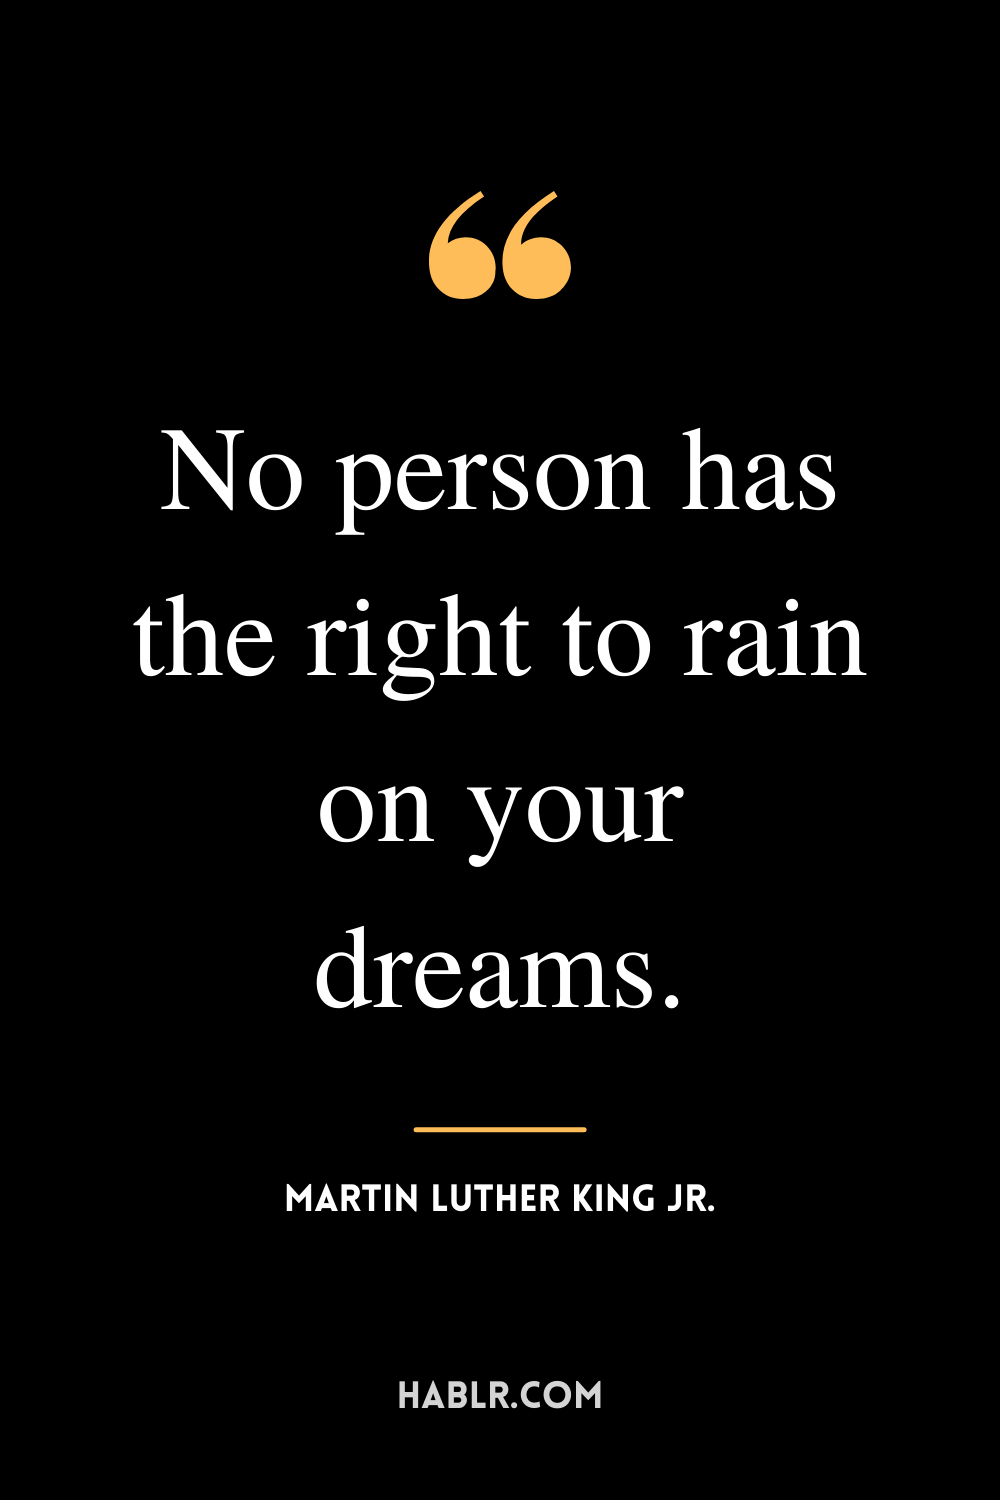 “No person has the right to rain on your dreams.” -Martin Luther King Jr.